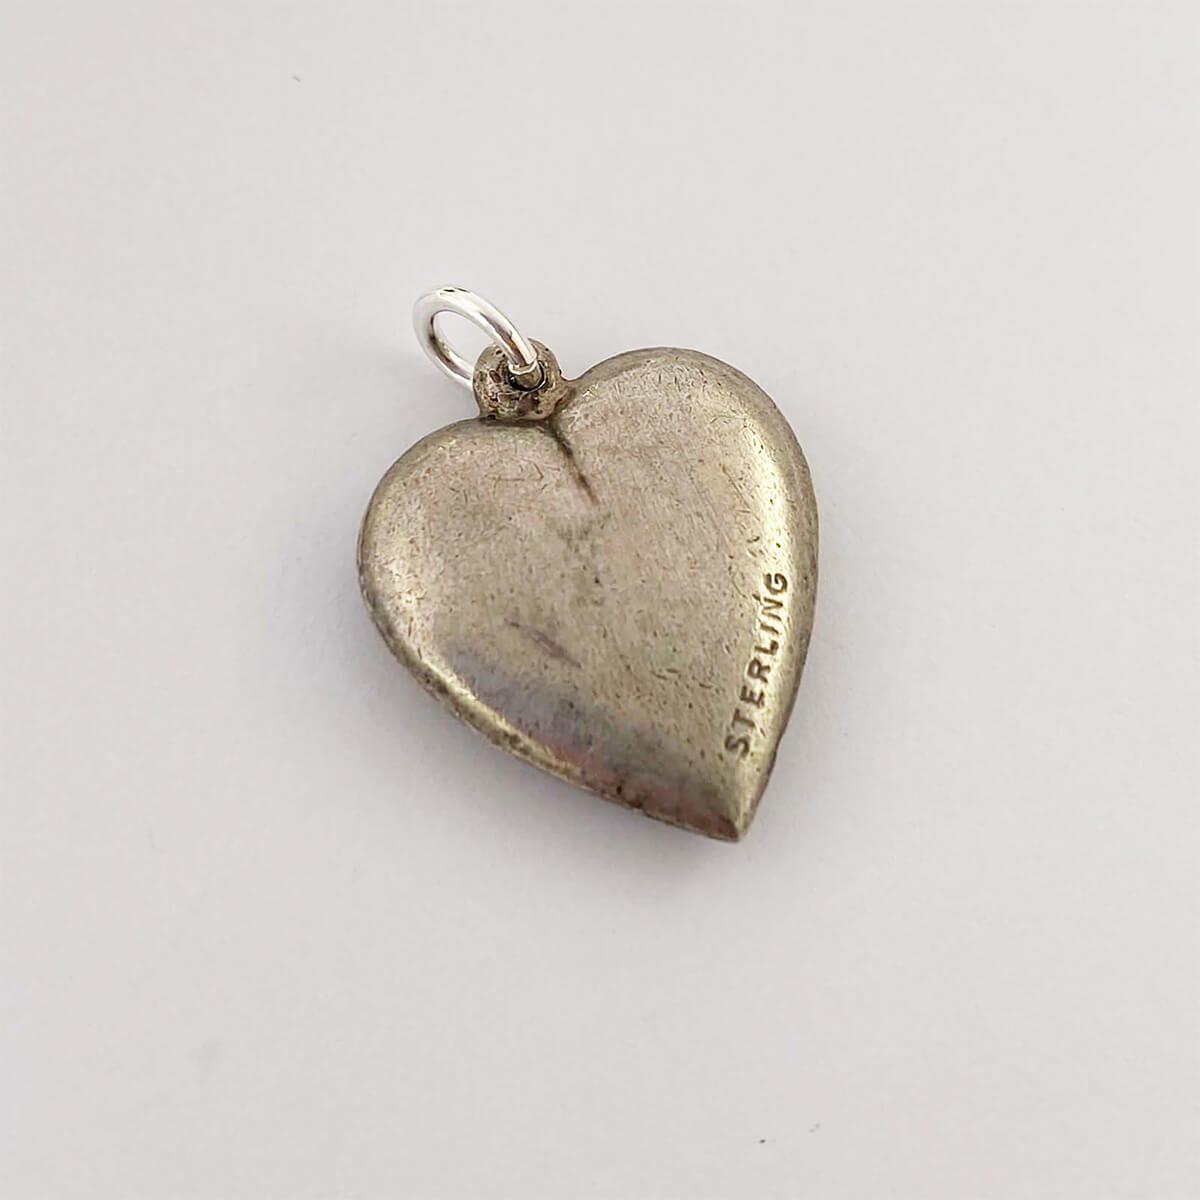 Vintage 1940s sterling silver floral forget-me-not heart charm from Charmarama